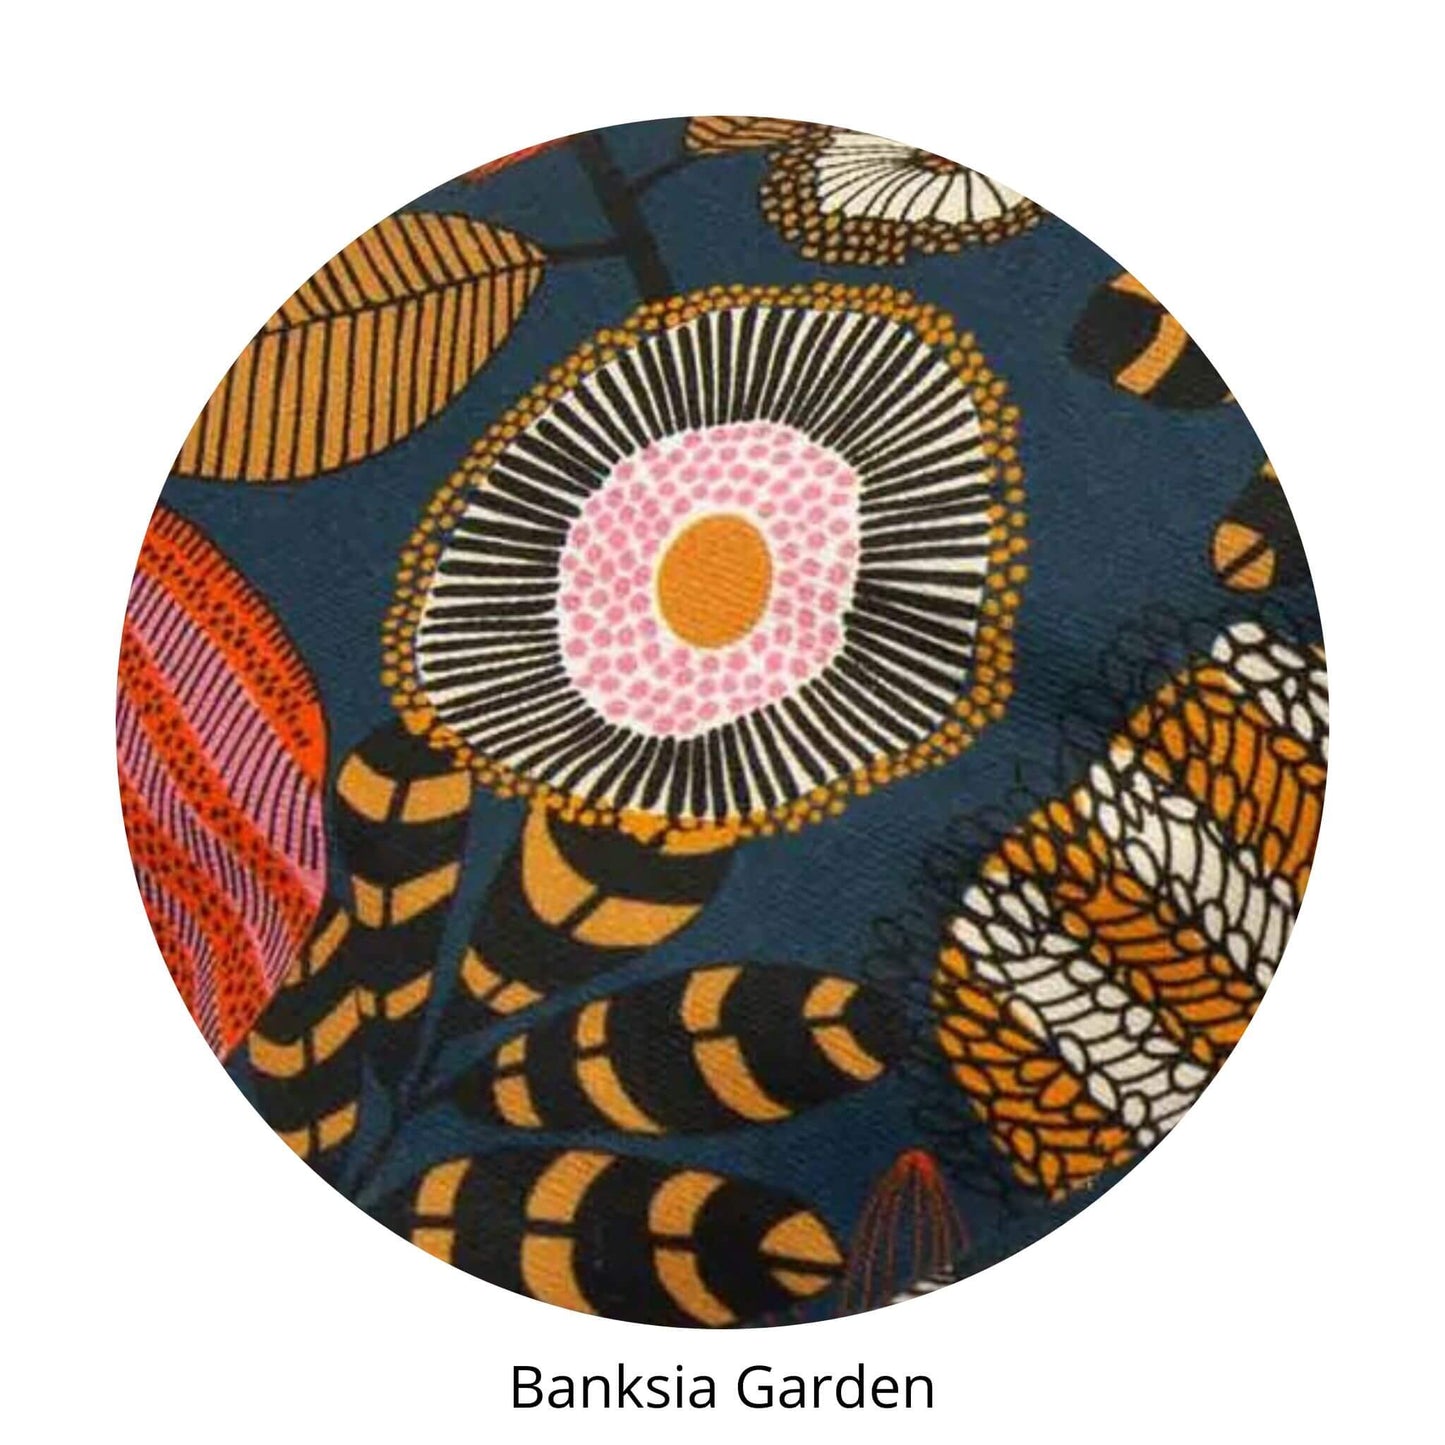 Bek + Eula wheat bag heat and cool packs in various colours - banksia garden swatch